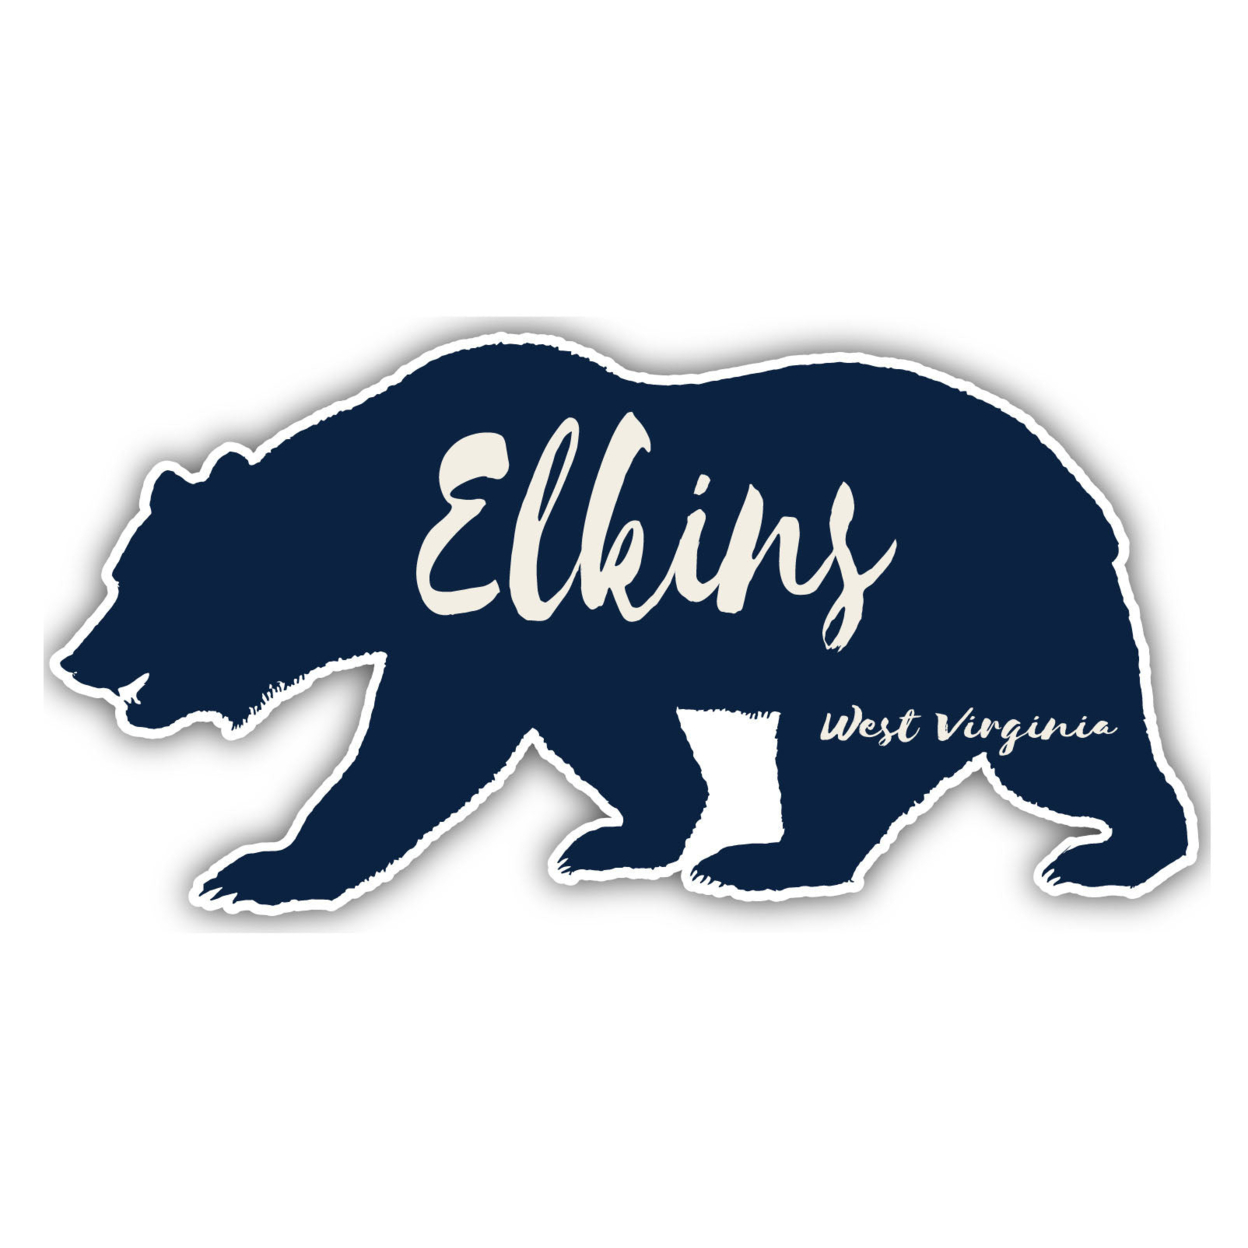 Elkins West Virginia Souvenir Decorative Stickers (Choose Theme And Size) - 4-Pack, 8-Inch, Bear